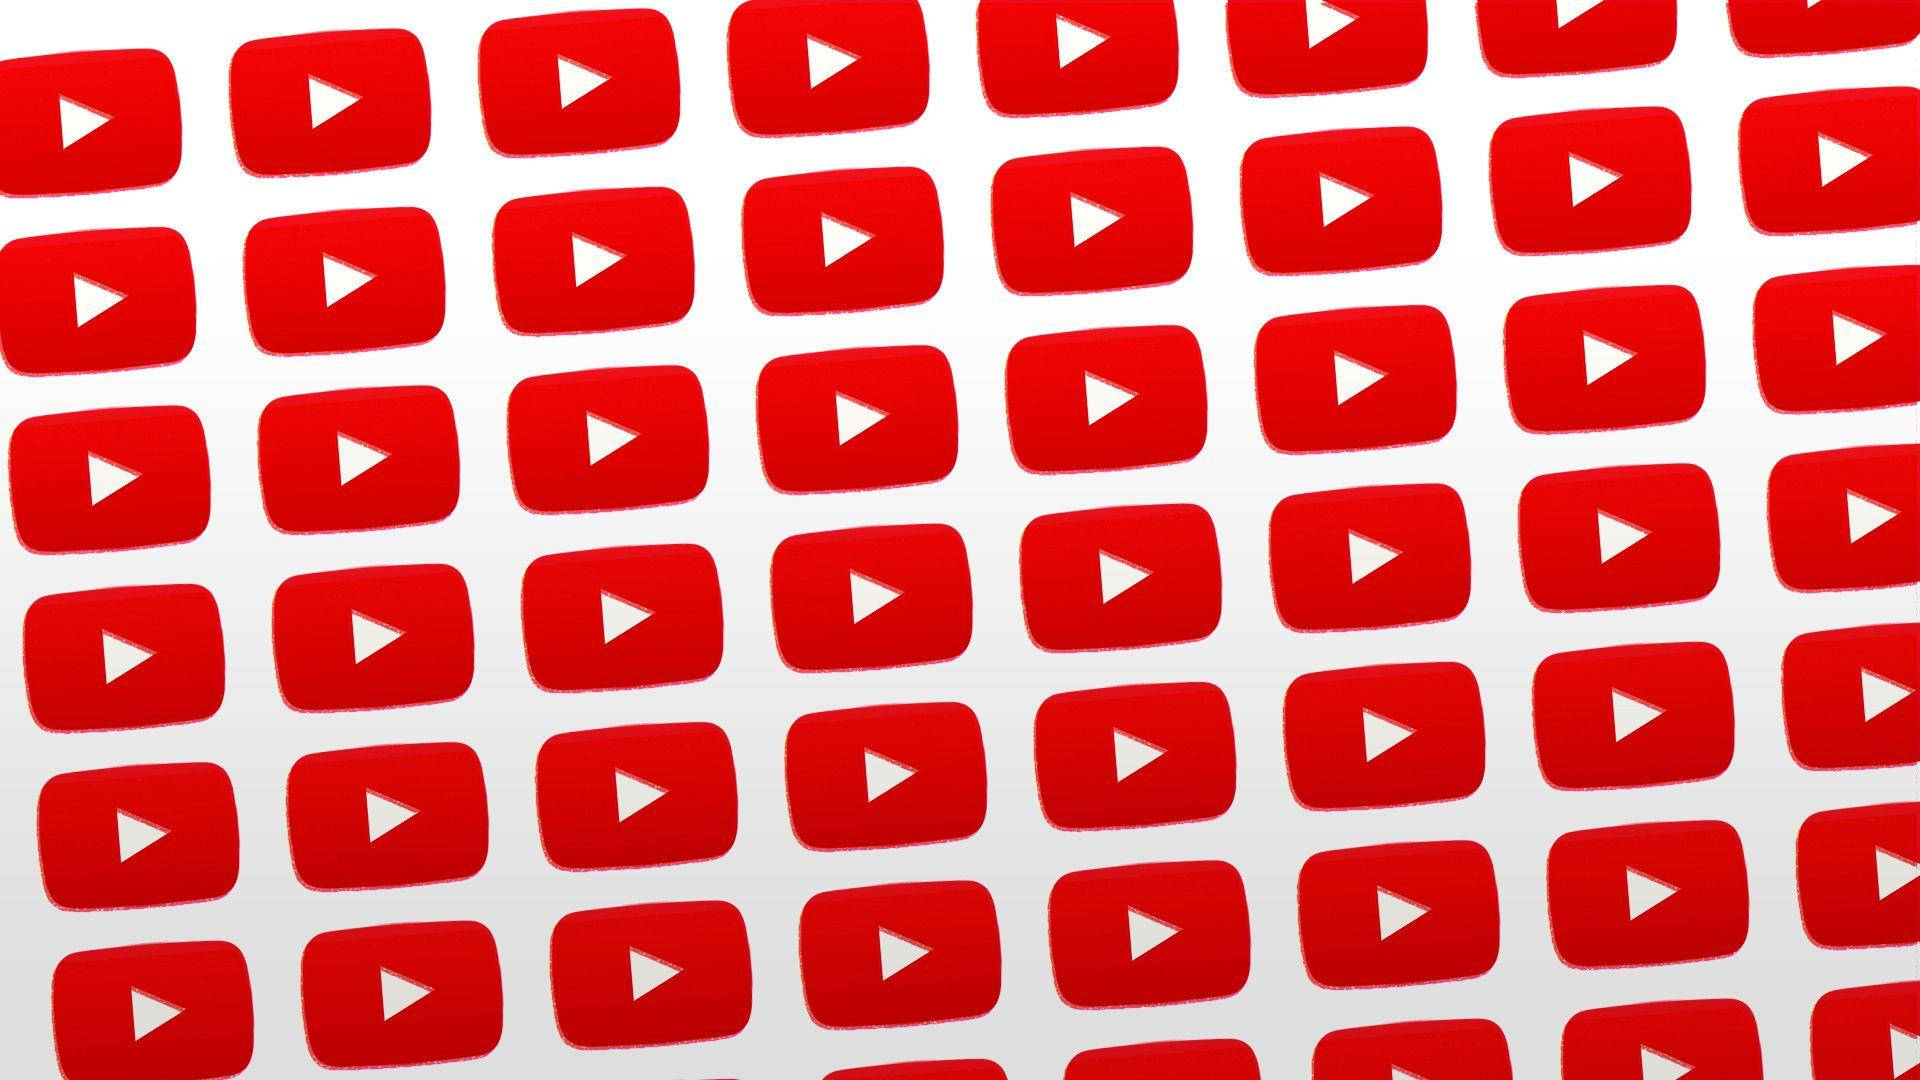 YouTube Background Play Buttons Wallpaper